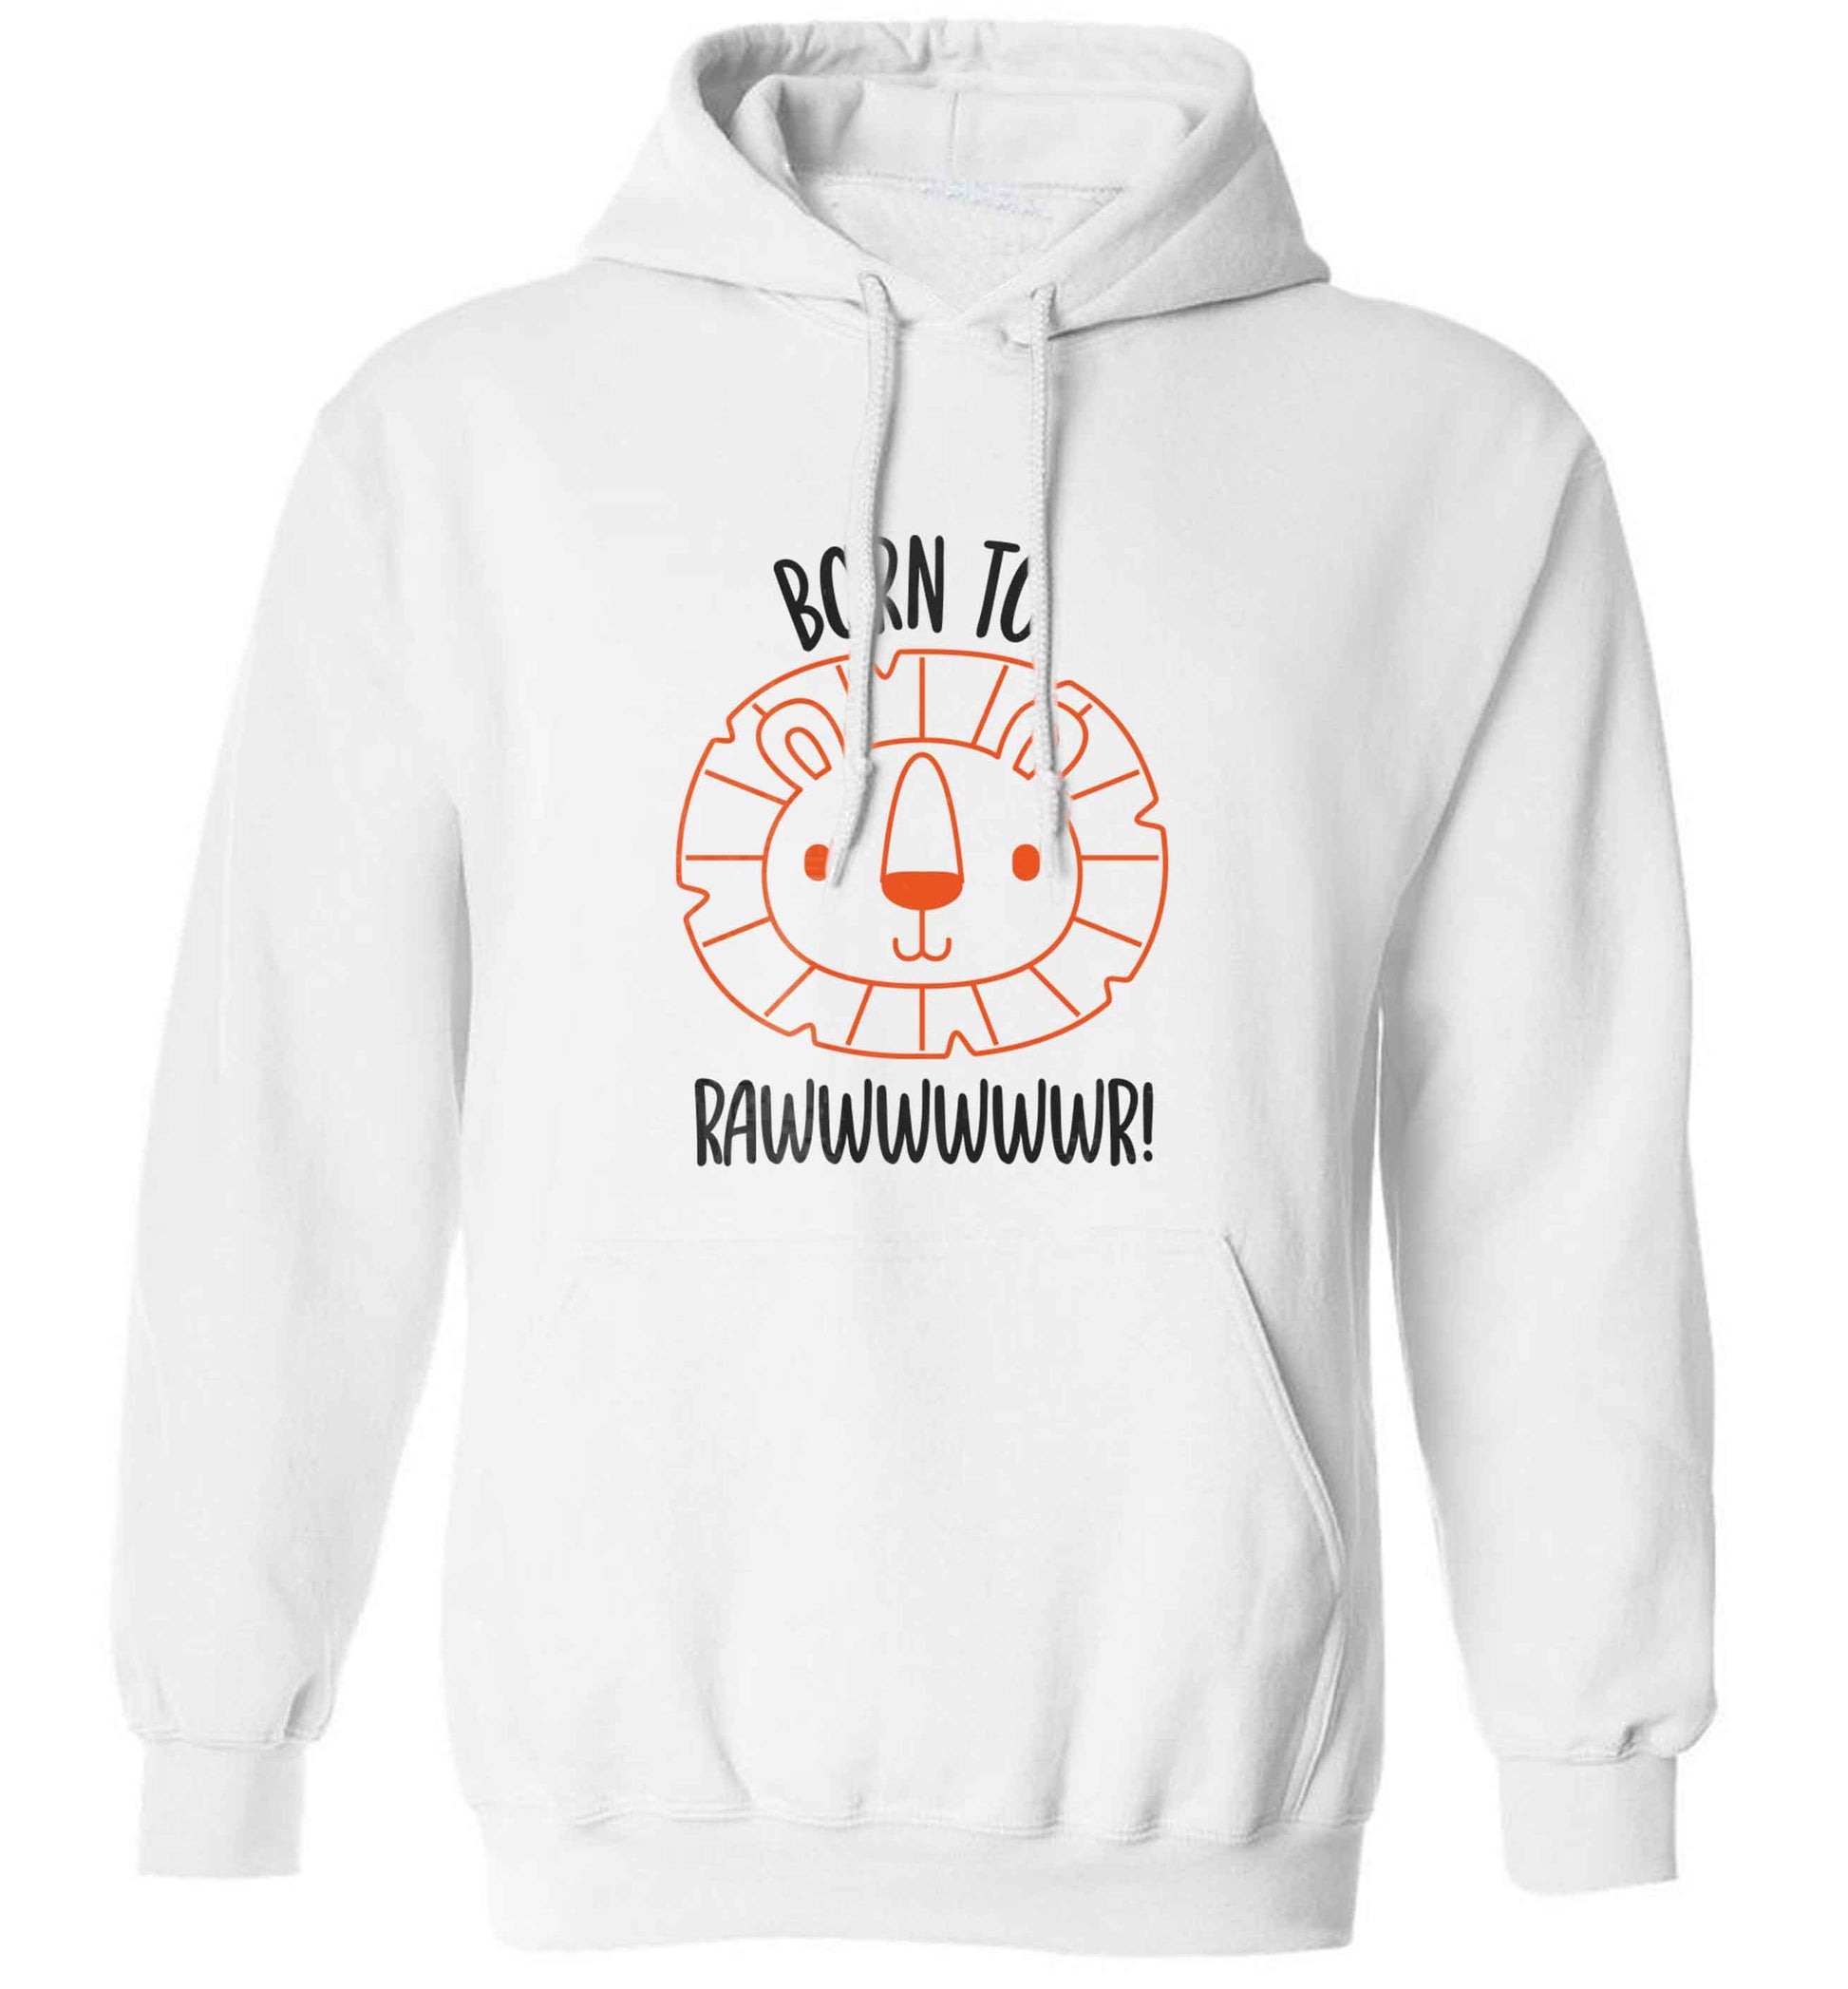 Born to rawr adults unisex white hoodie 2XL